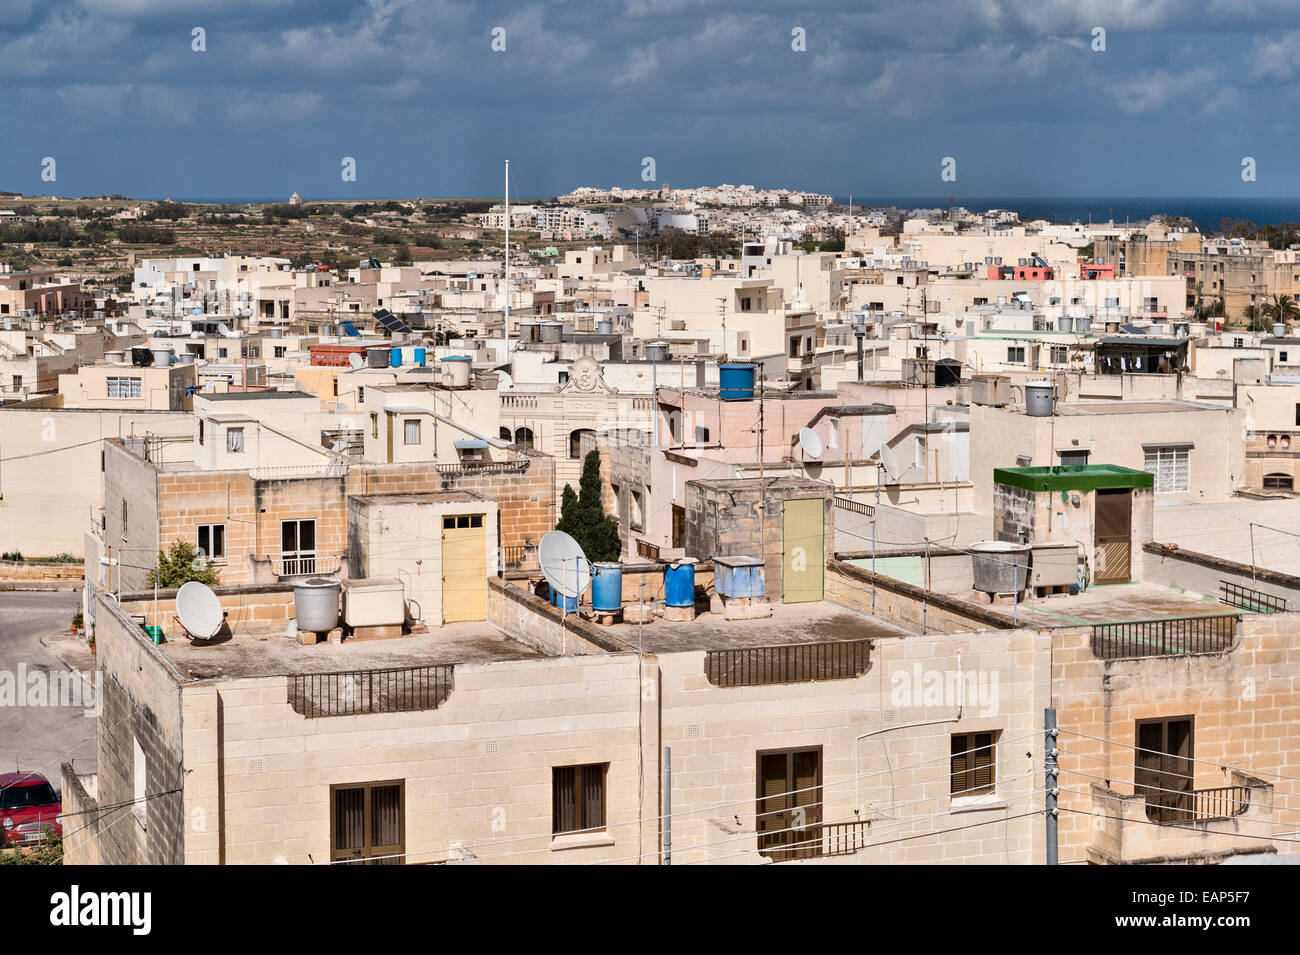 Zejtun, Malta. A rooftop view shows many houses with passive solar water heaters Stock Photo